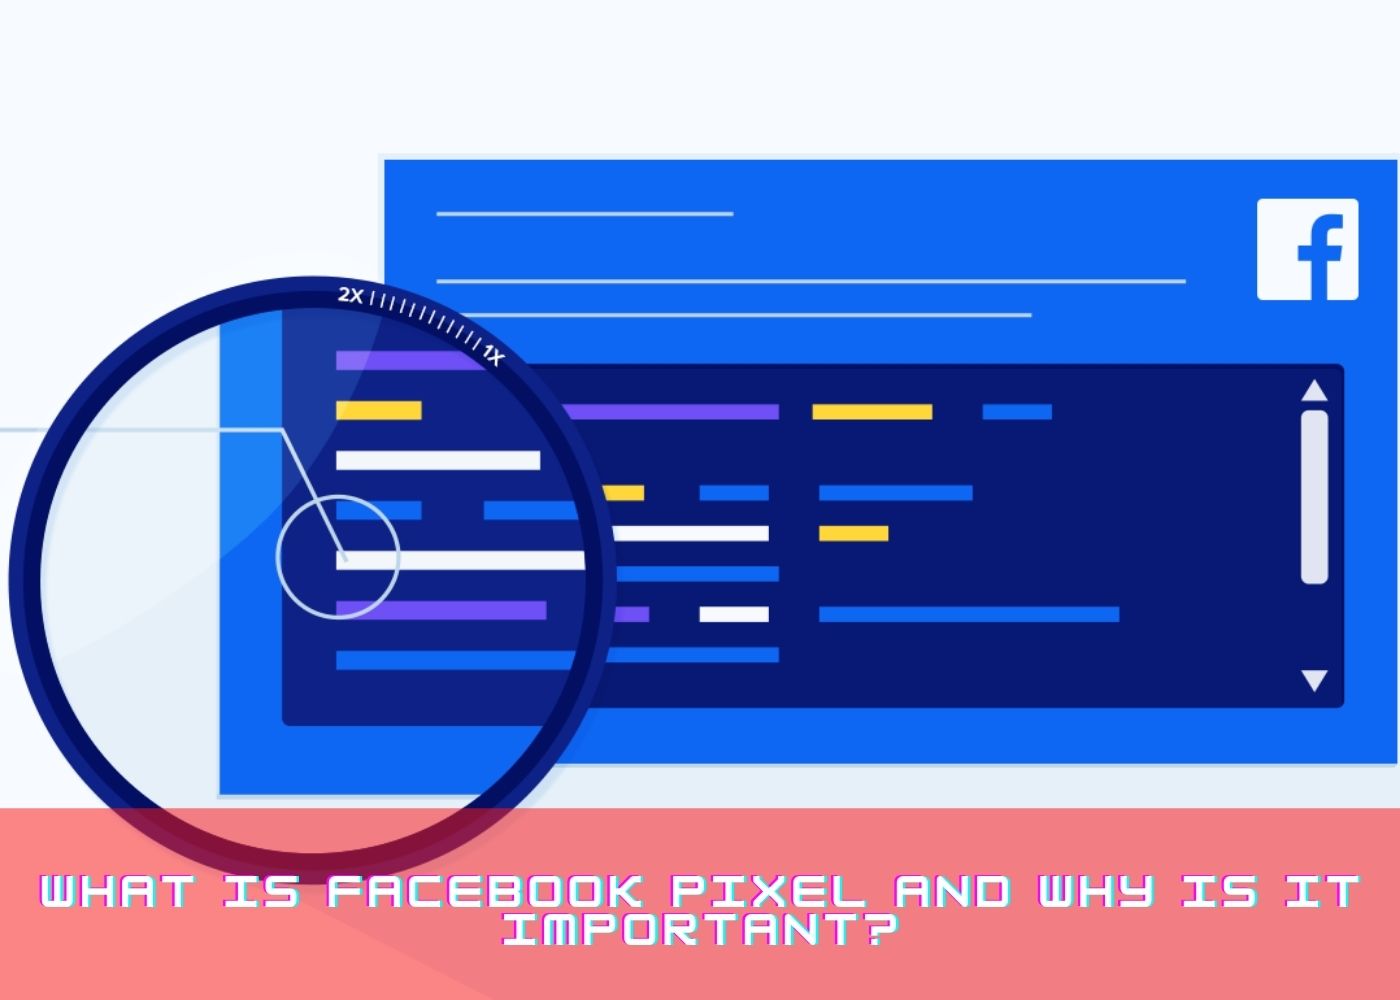 What is Facebook Pixel and why is it important?